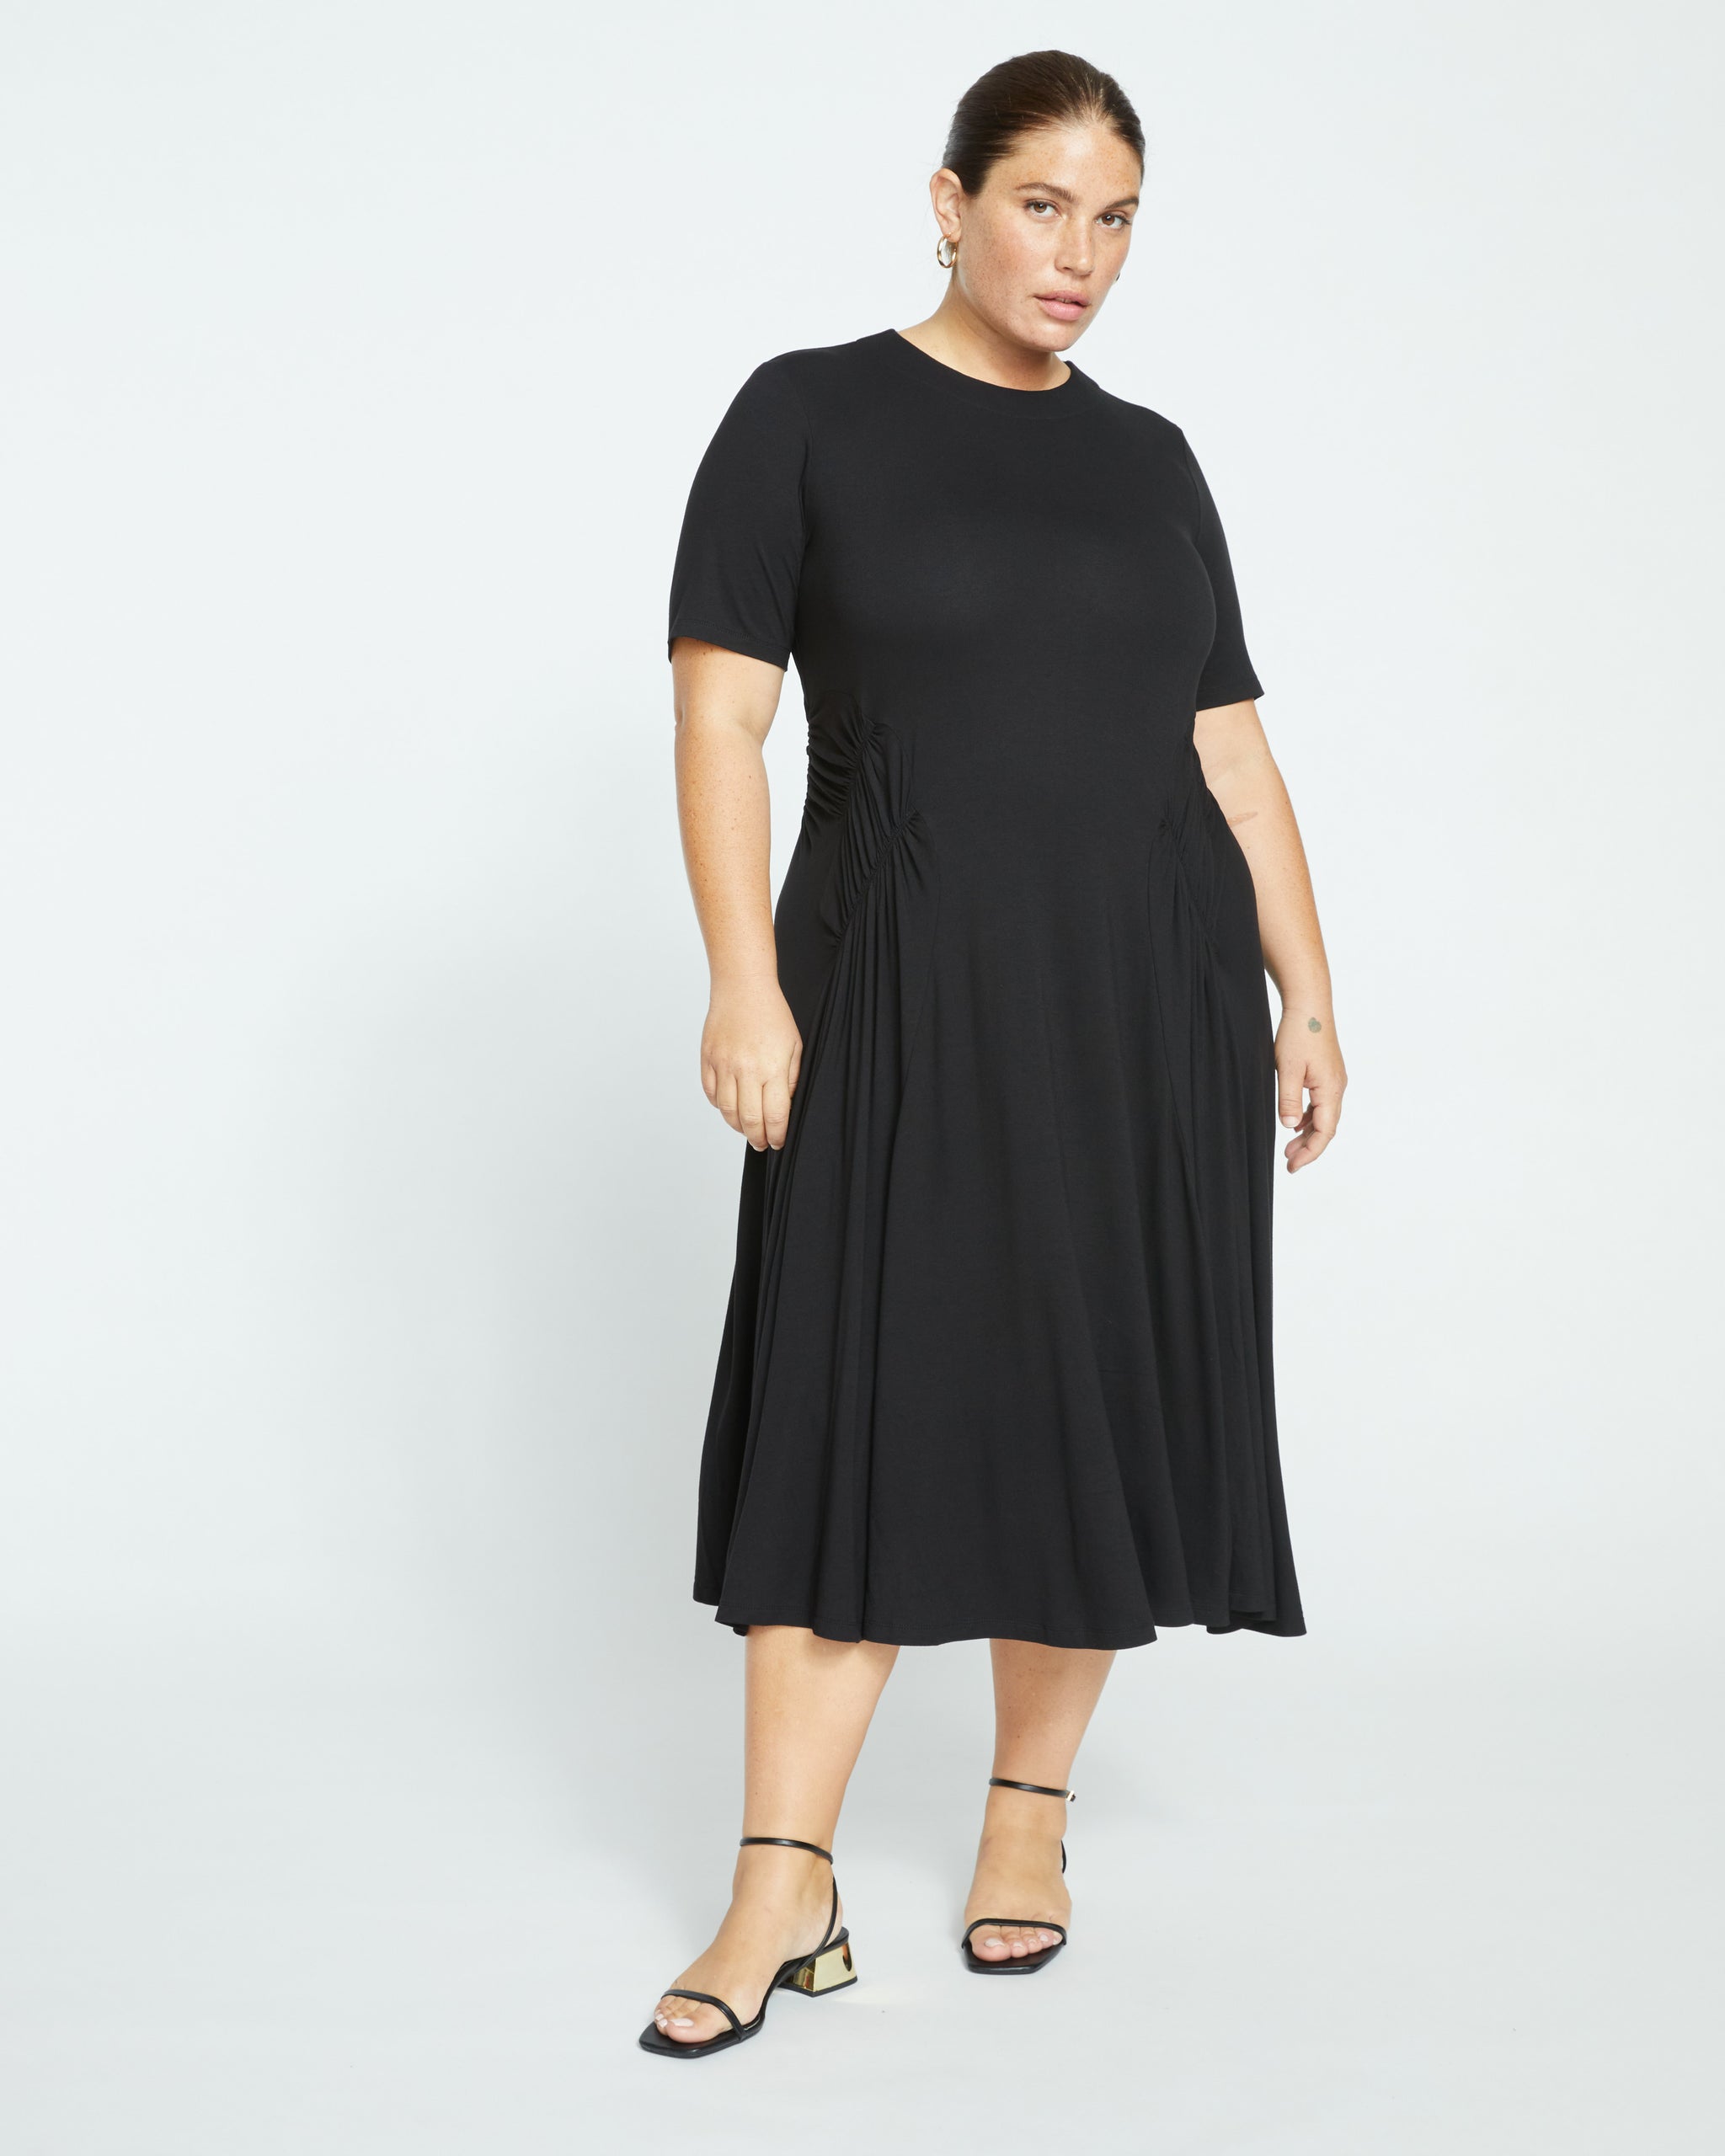 Easy Black Jersey Dress - Adored By Alex